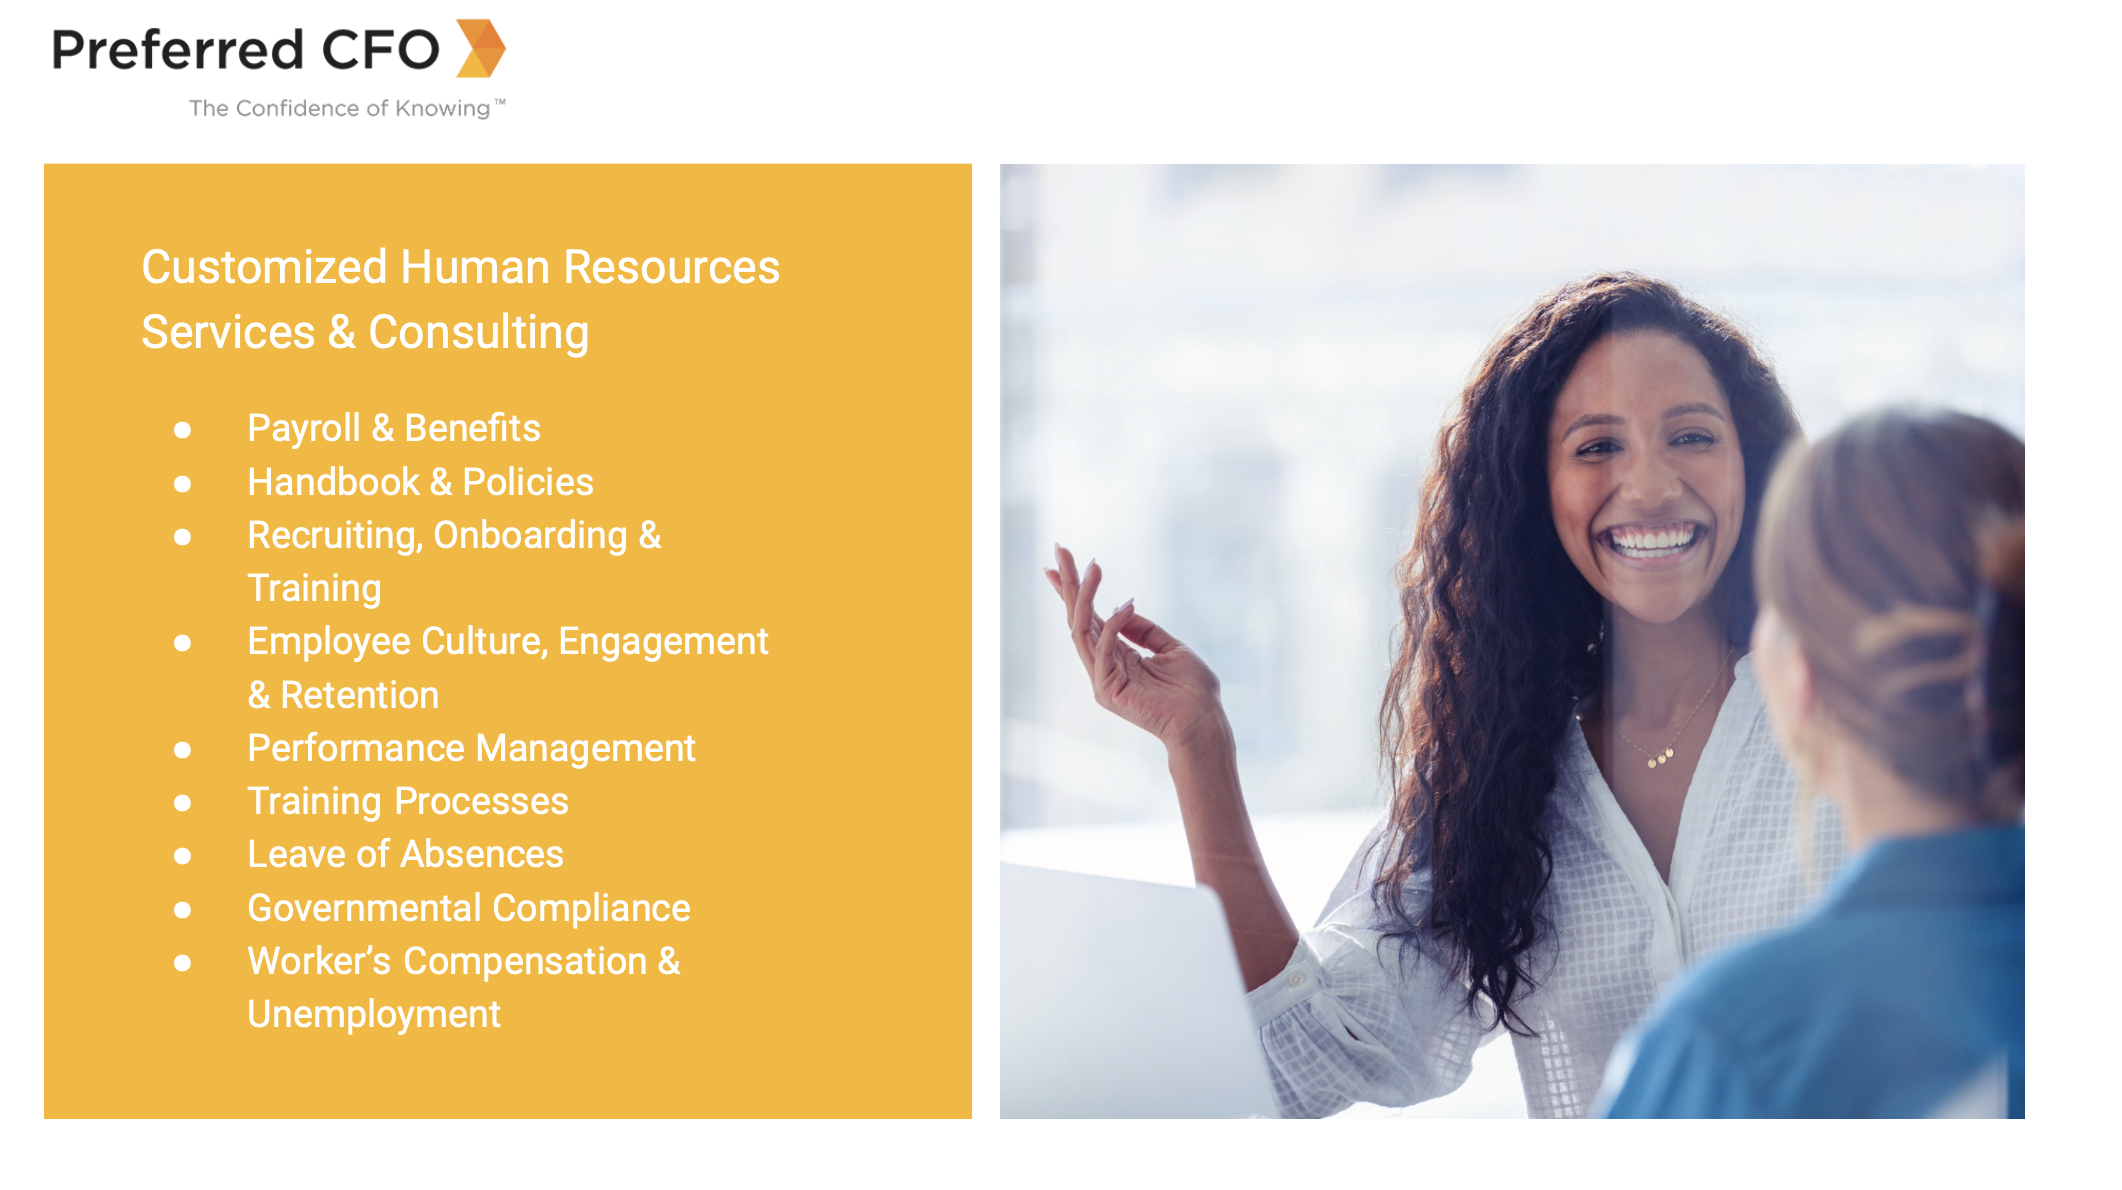 Slide showing list of Preferred CFO's outsourced HR solutions, available on the website in text form by clicking "HR Services" in the top navigation